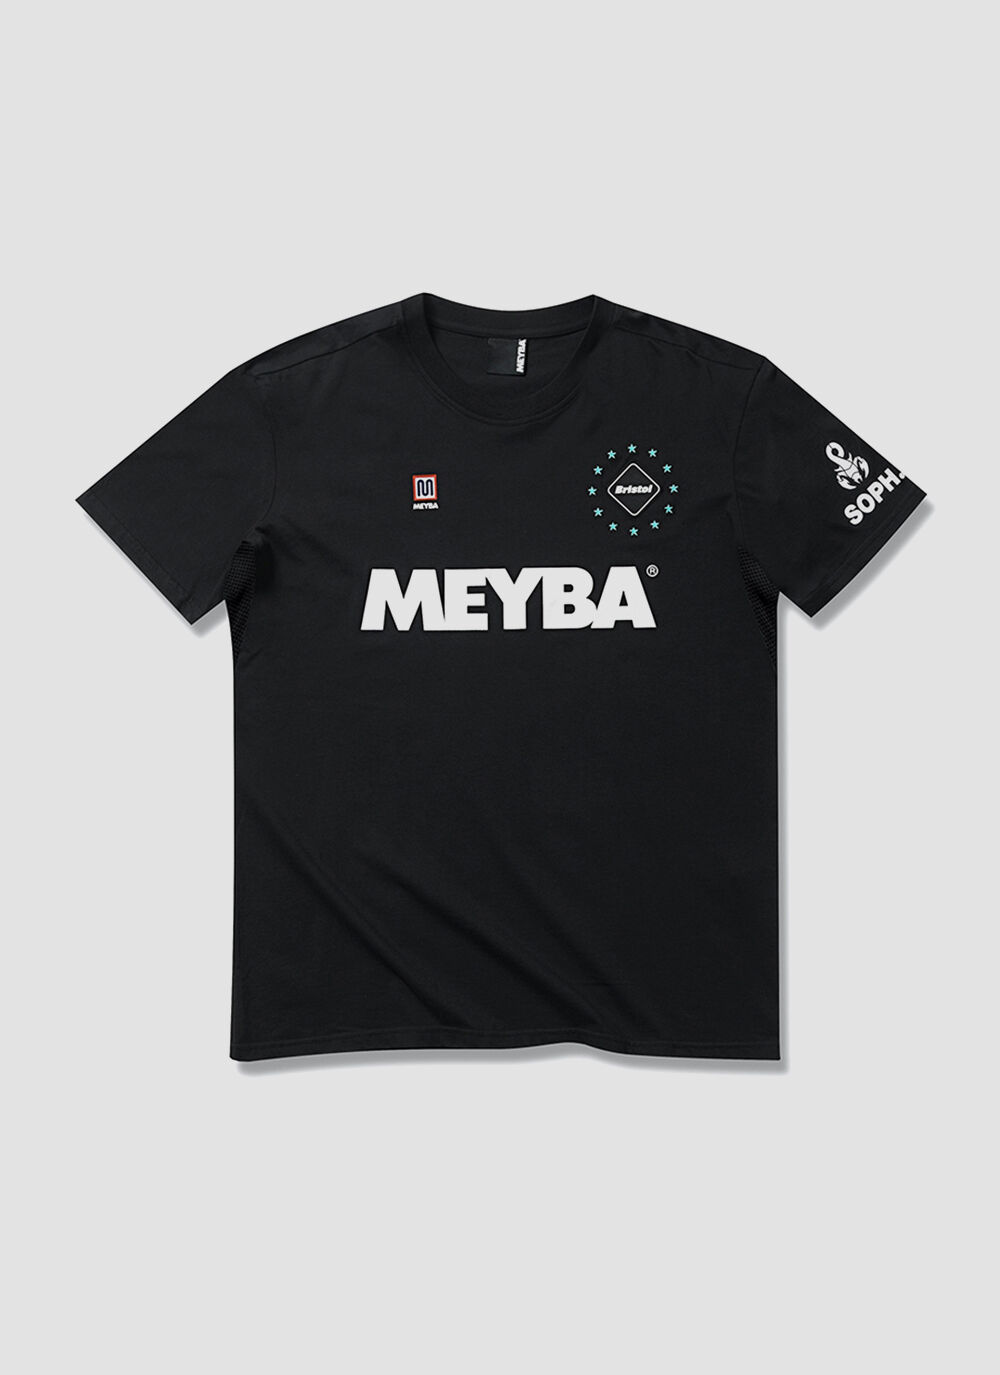 FCRB MEYBA GAME SHIRT-